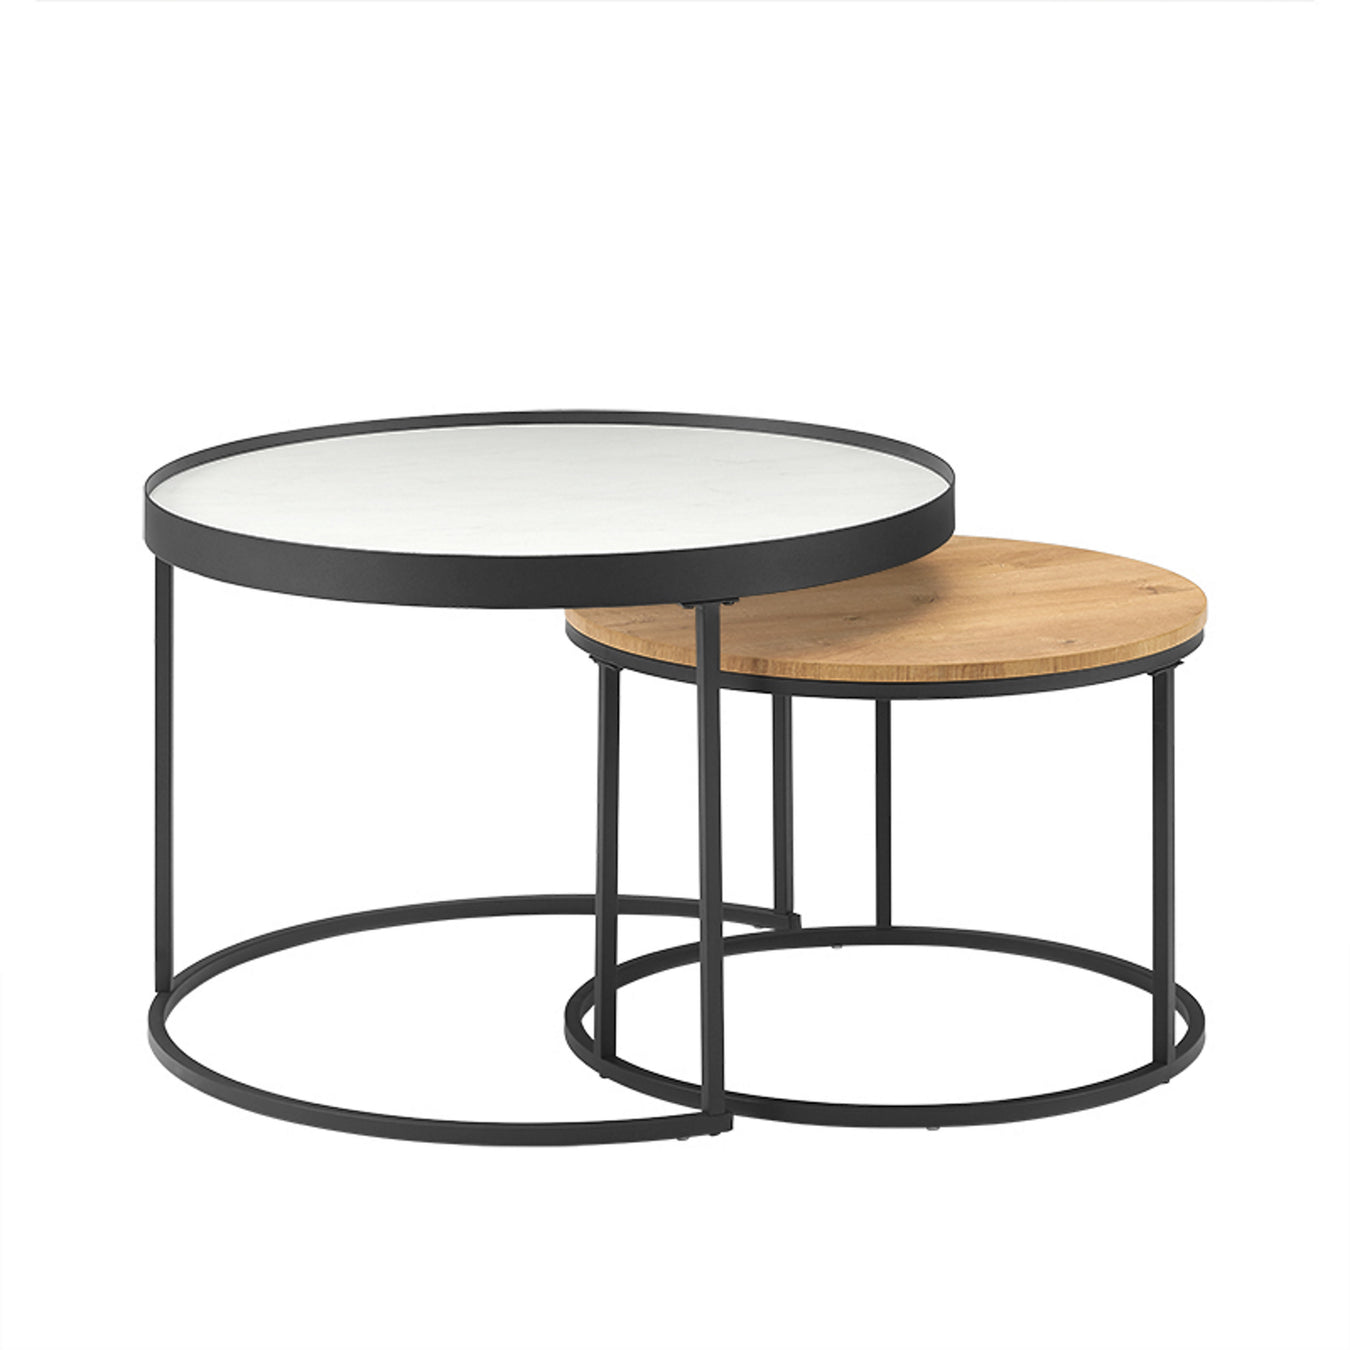 Nested Coffee Tables For Sale Online